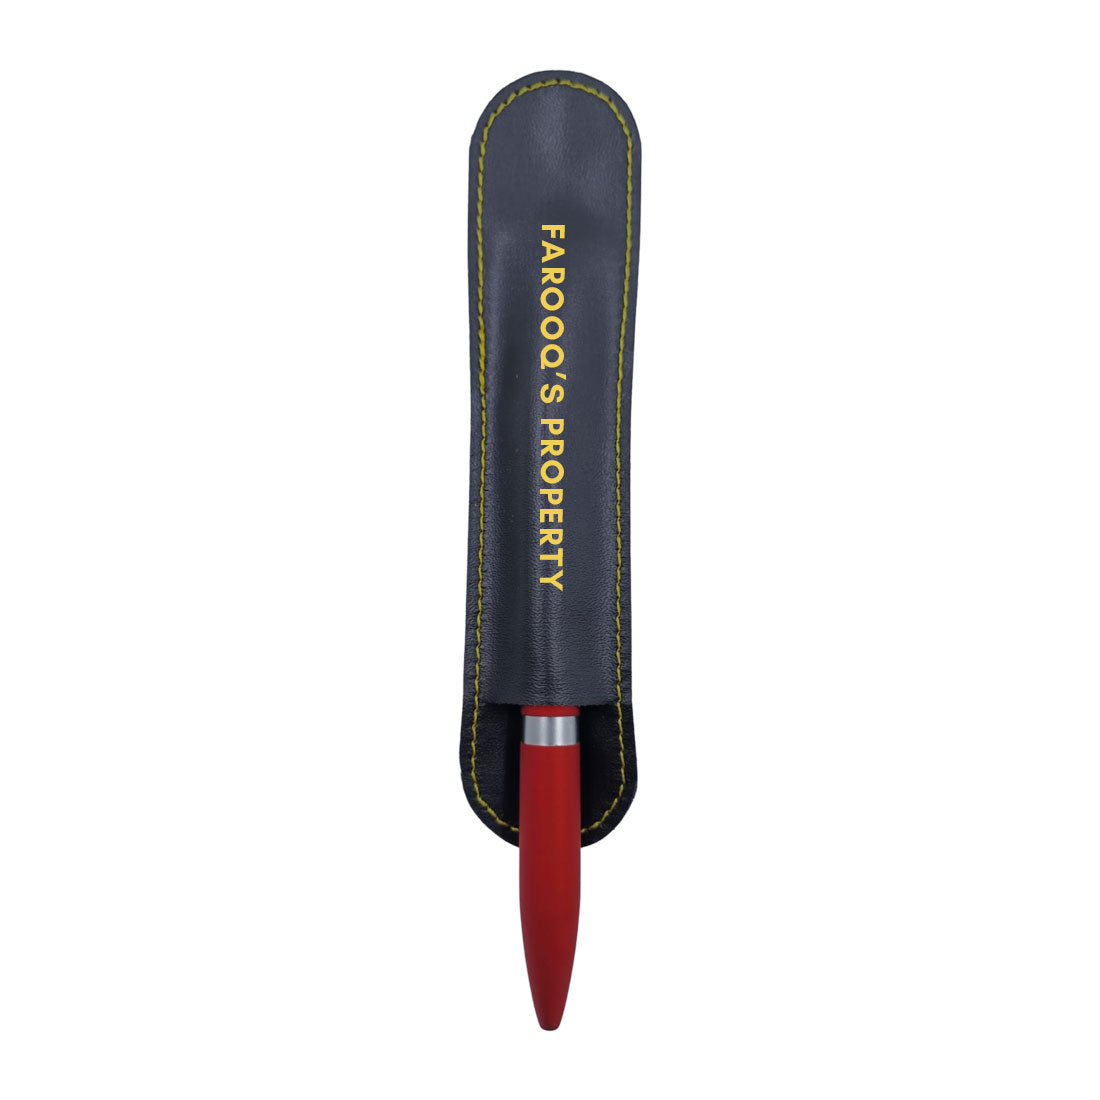 Custom Engraved Pen/Pencil Holder – Customized With Your Personalized Text